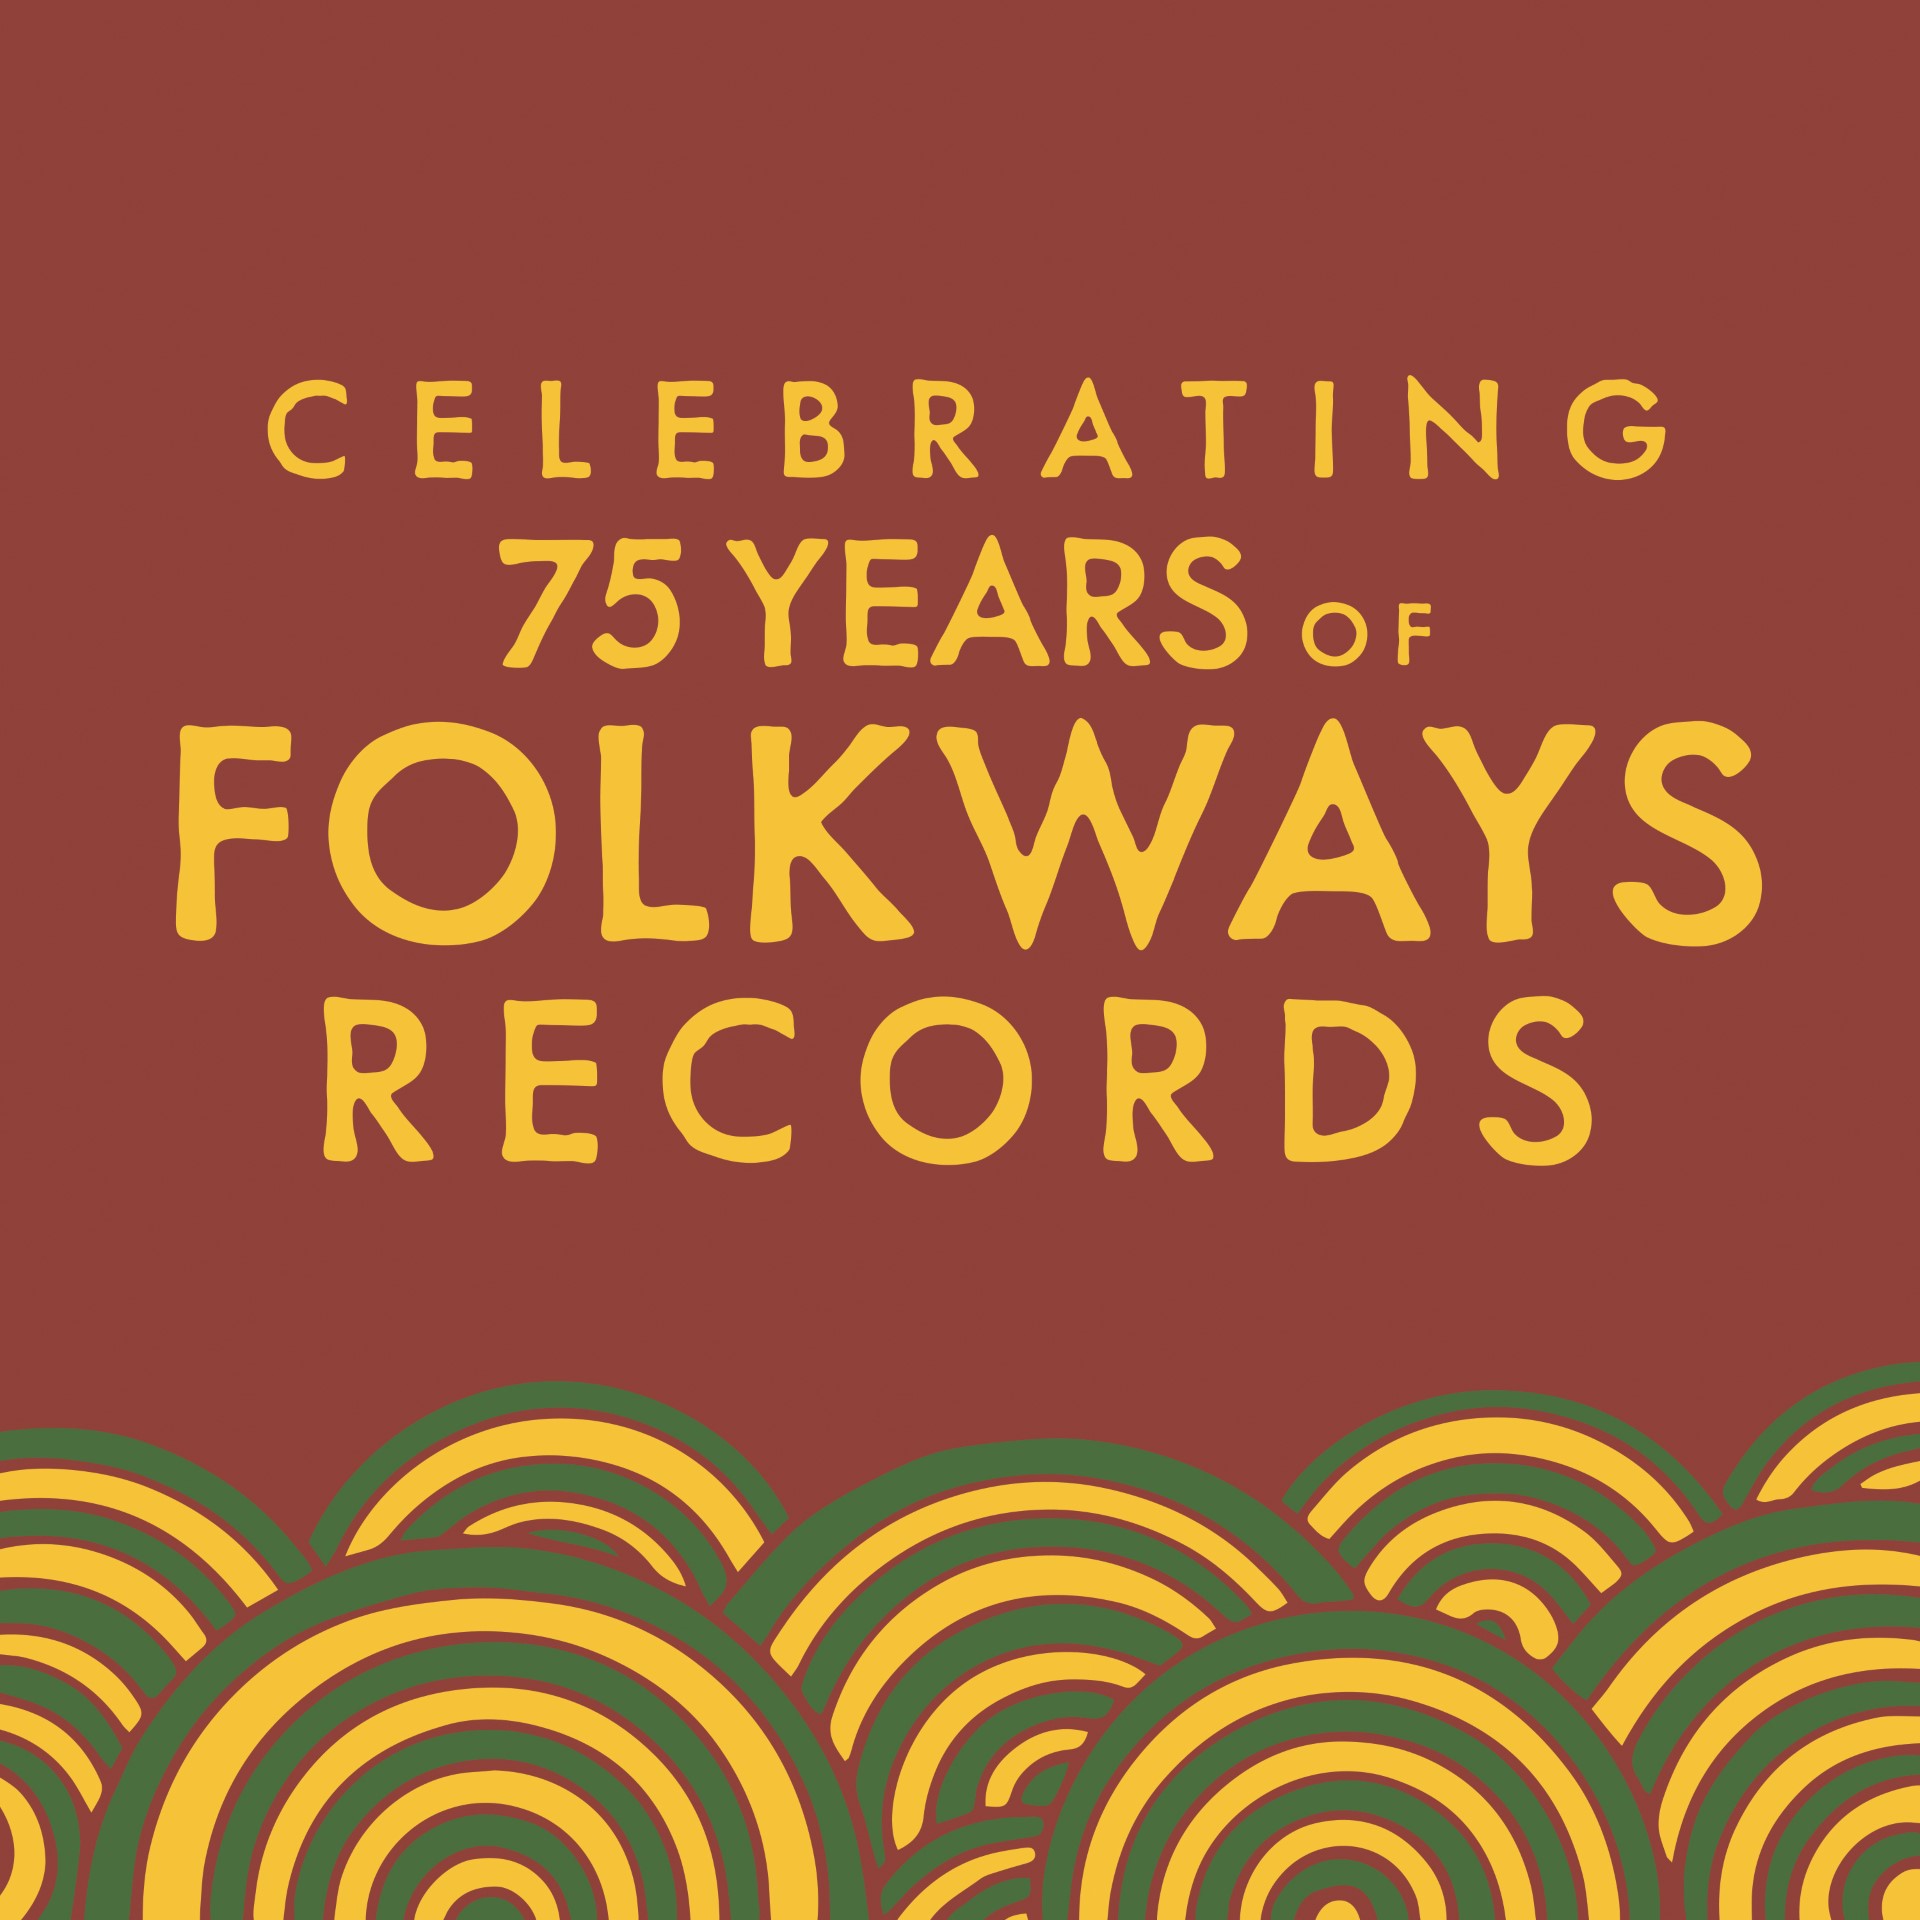  Smithsonian Folkways Records To Celebrate 75th Anniversary